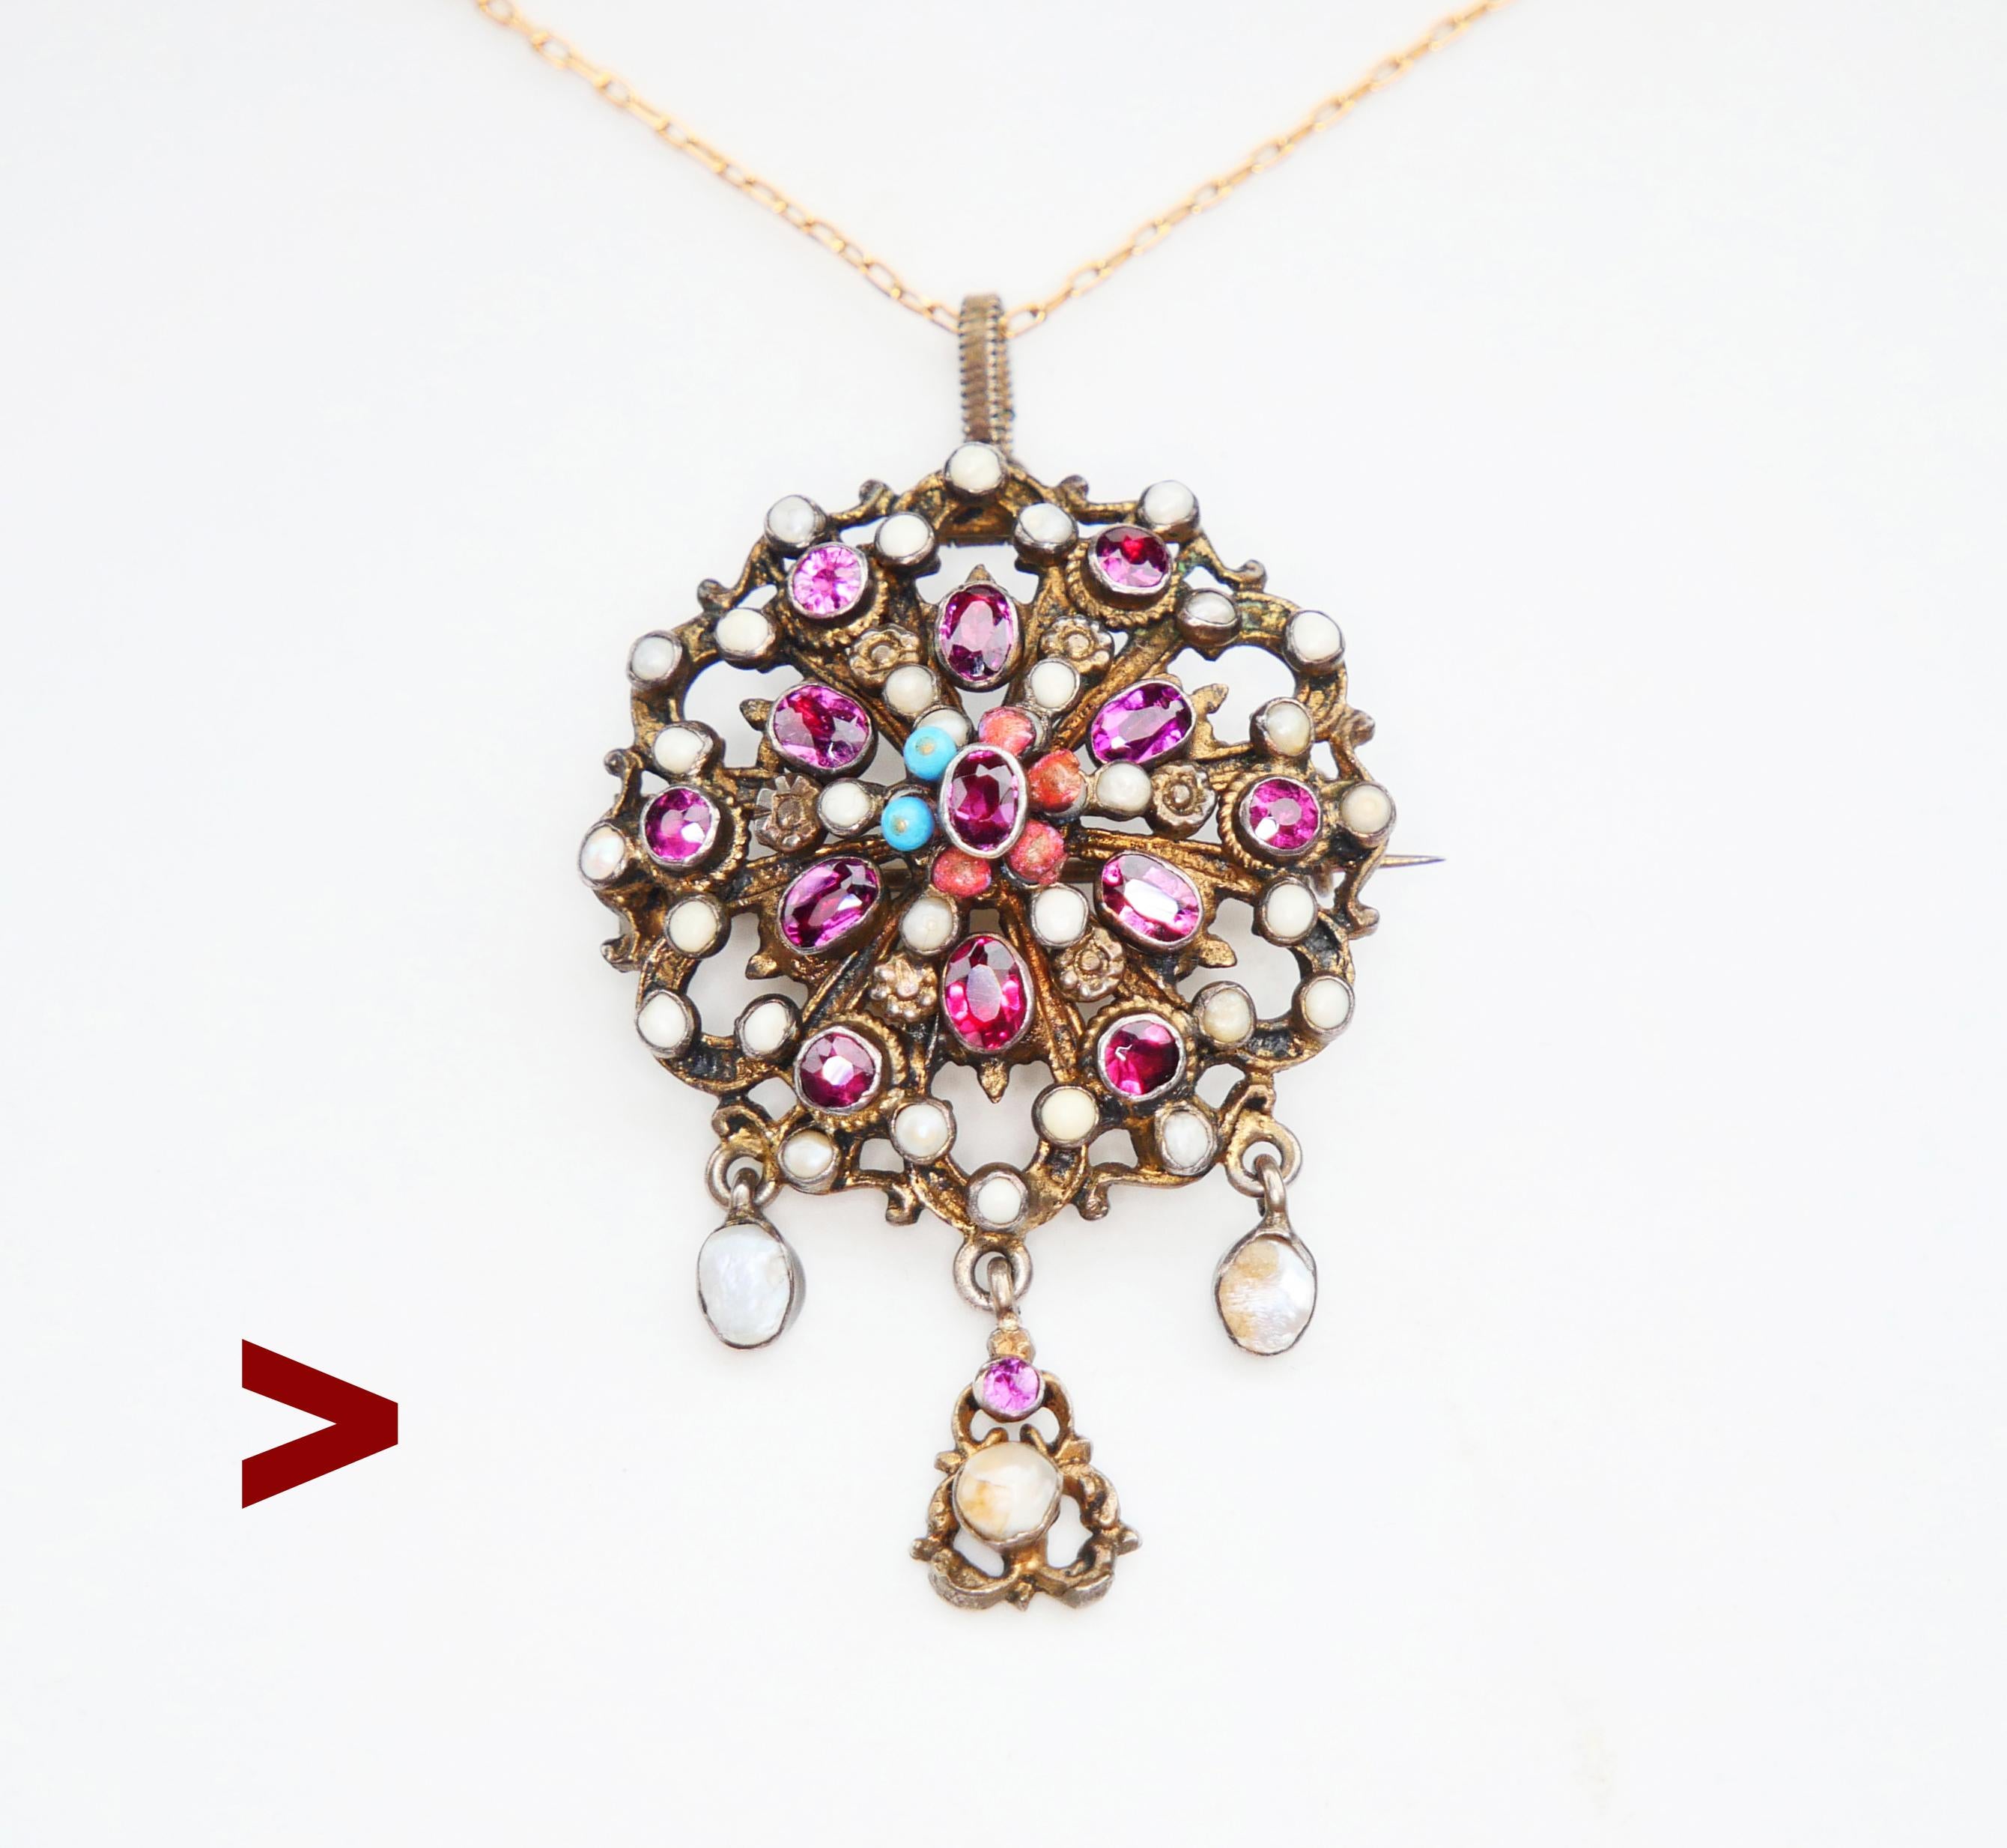 Fine Antique piece of Bohemian jewelry made on the territories of the former Austrian-Hungarian Empire ca. late 19th century. This type of design closely follows the patterns of Renaissance styles that were very trendy in Europe in the 1850s -